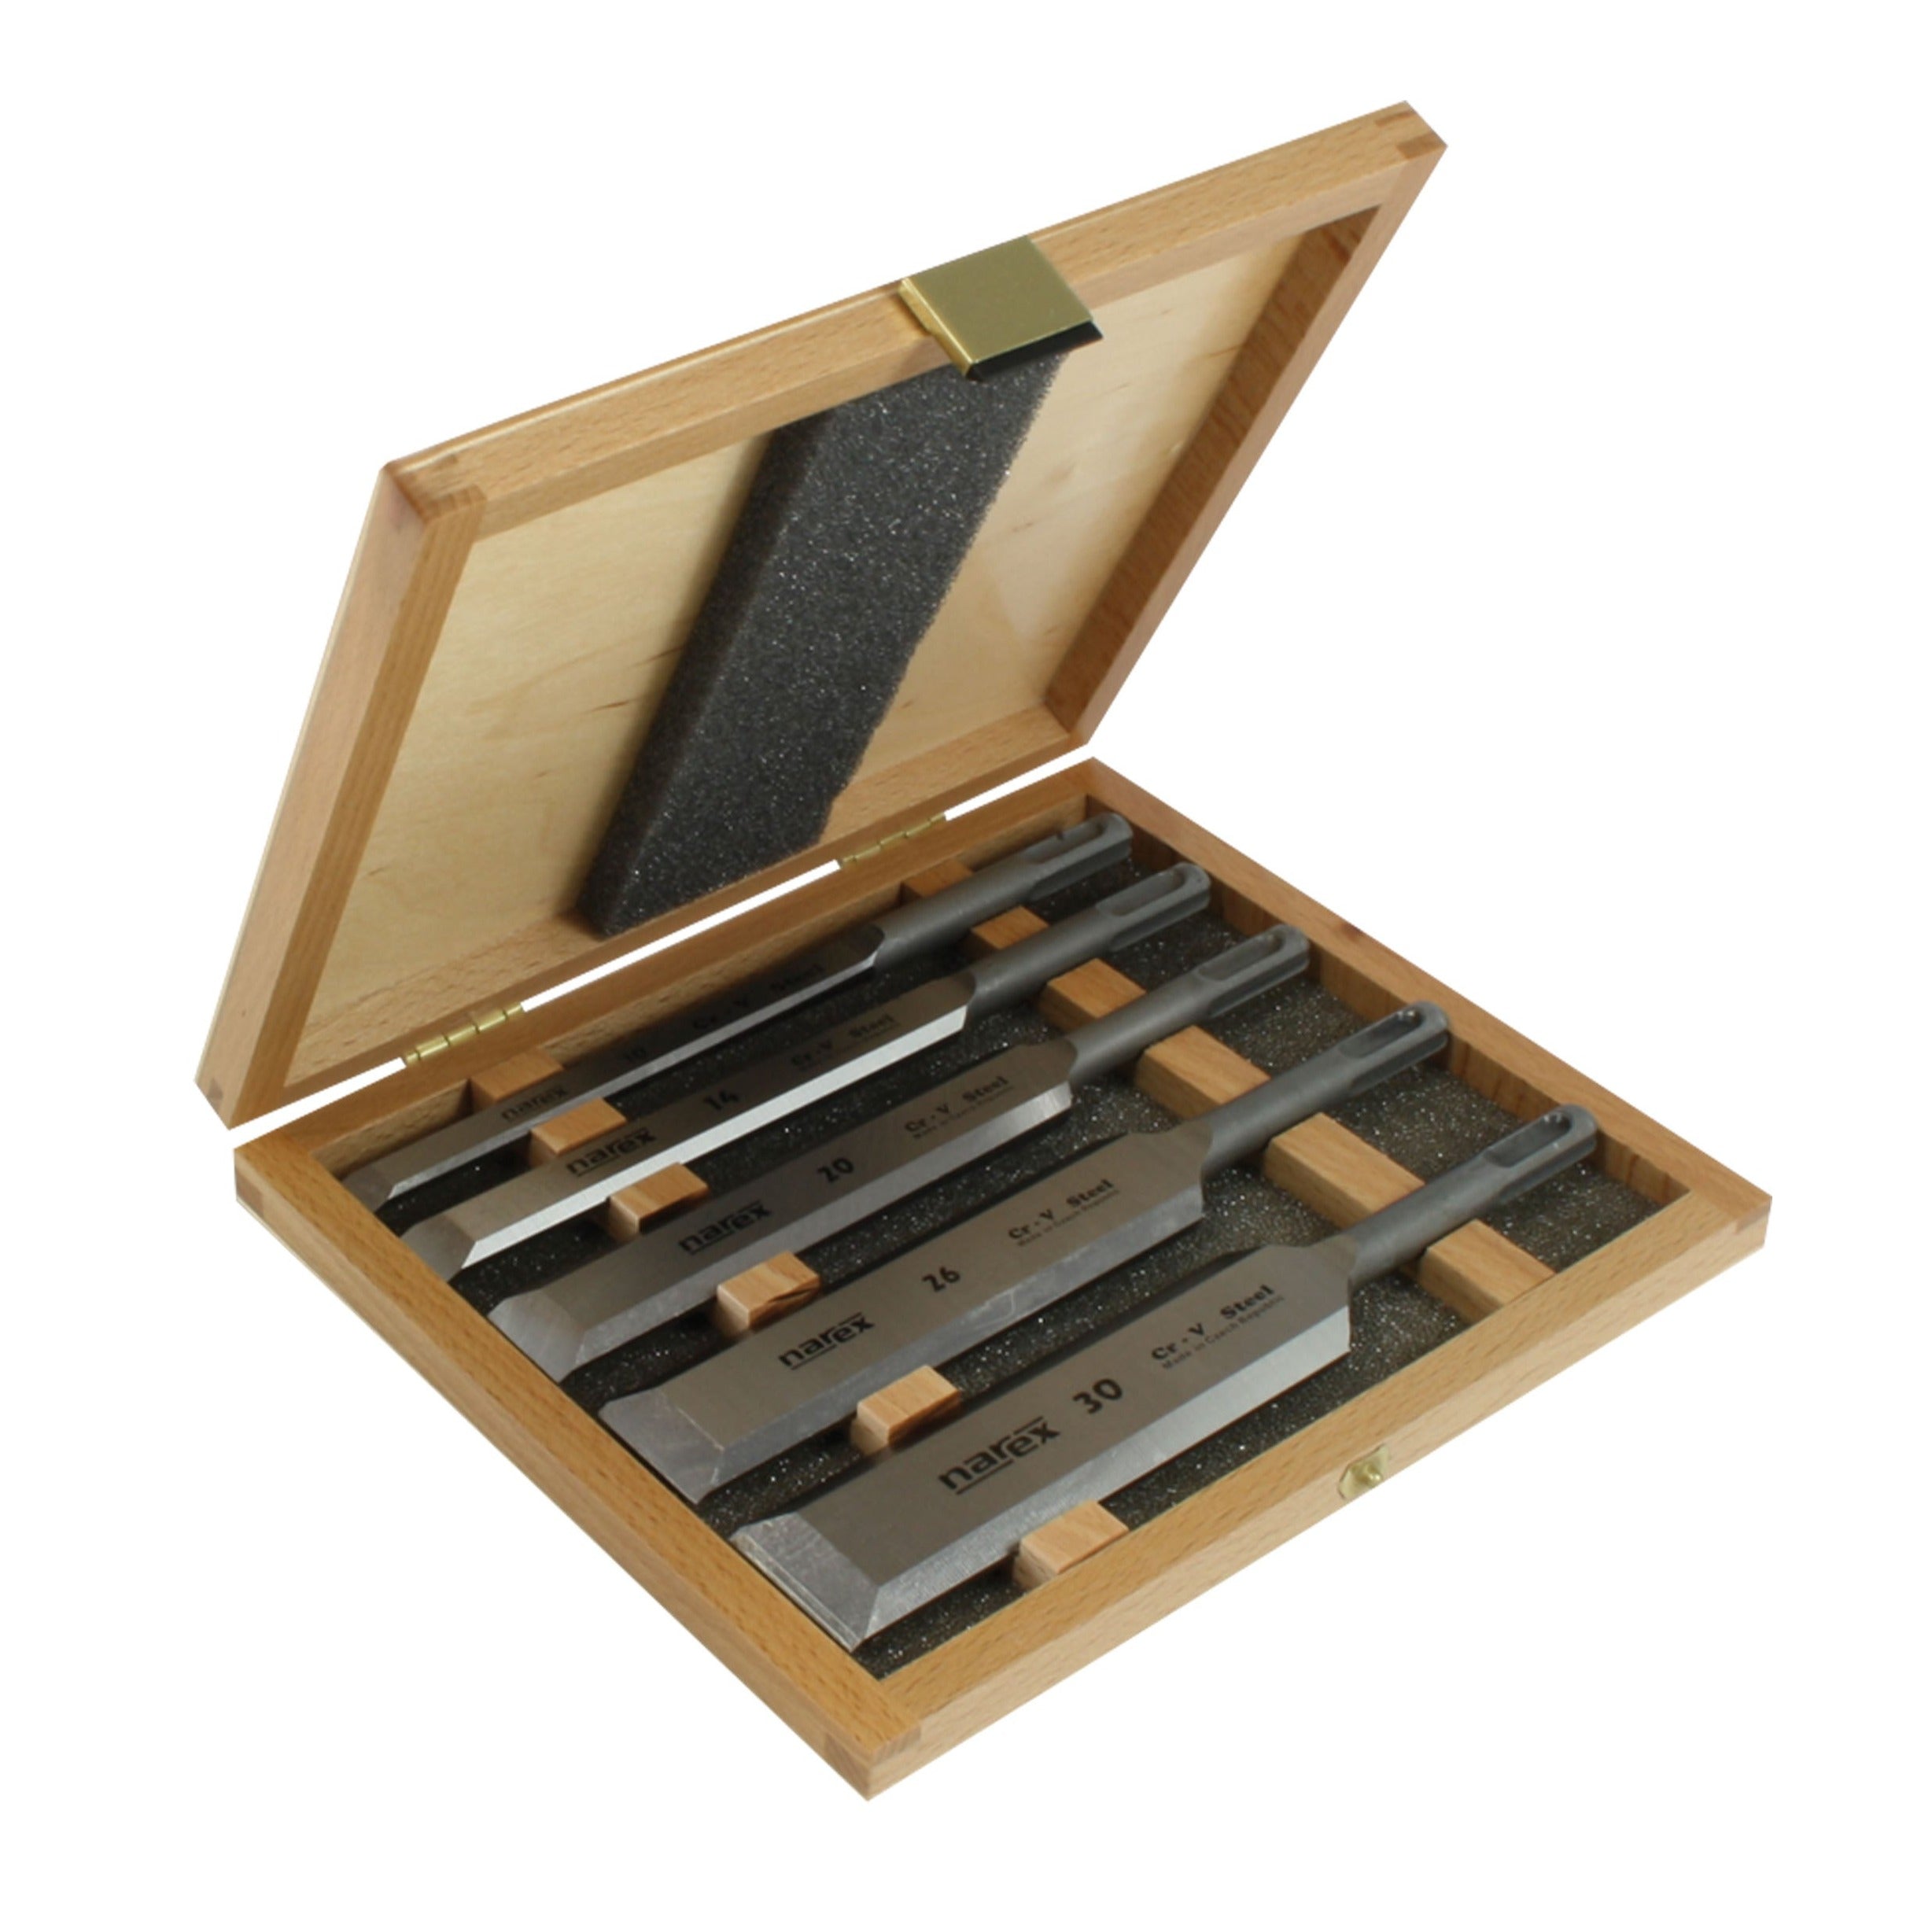 Set of Machine Chisels with Shank Mount 5pce (10mm / 14mm / 20mm / 26mm / 30mm) in Wooden Box 853901 by Narex